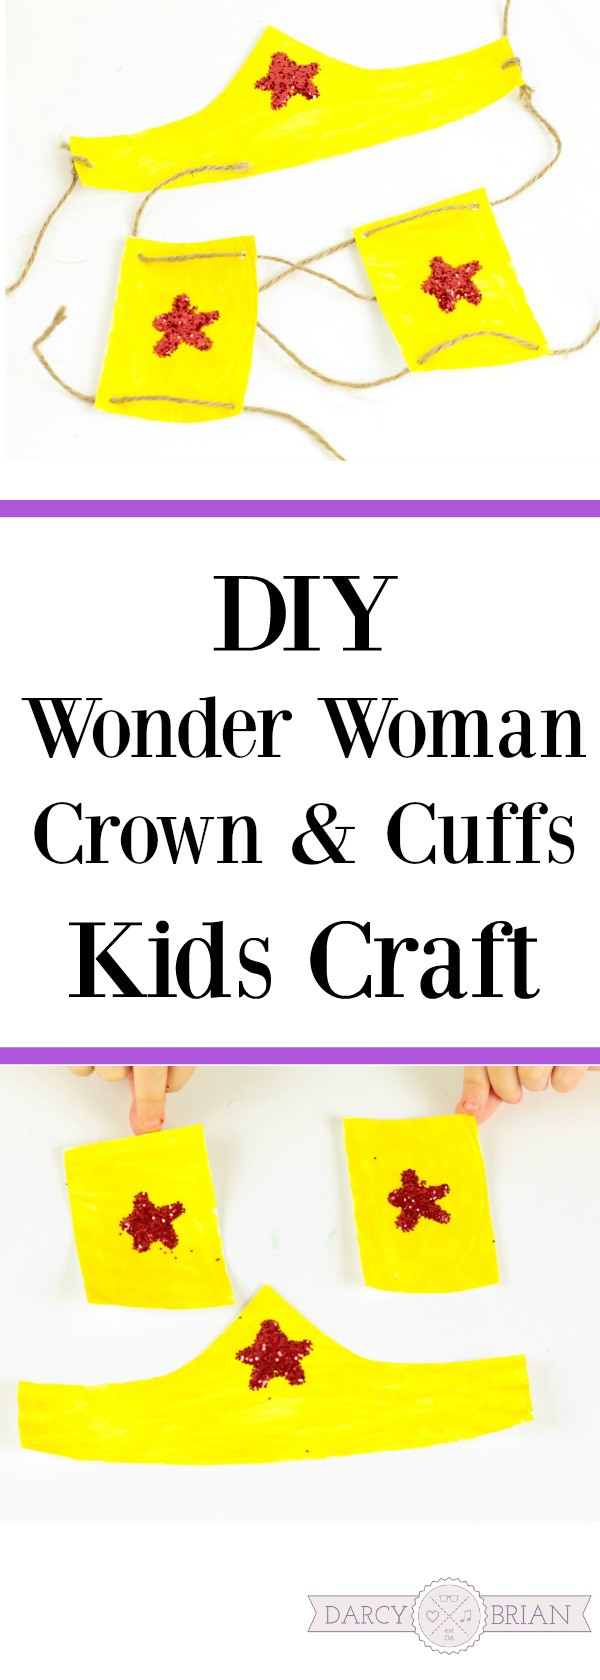 DIY Woman and Cuffs Craft for